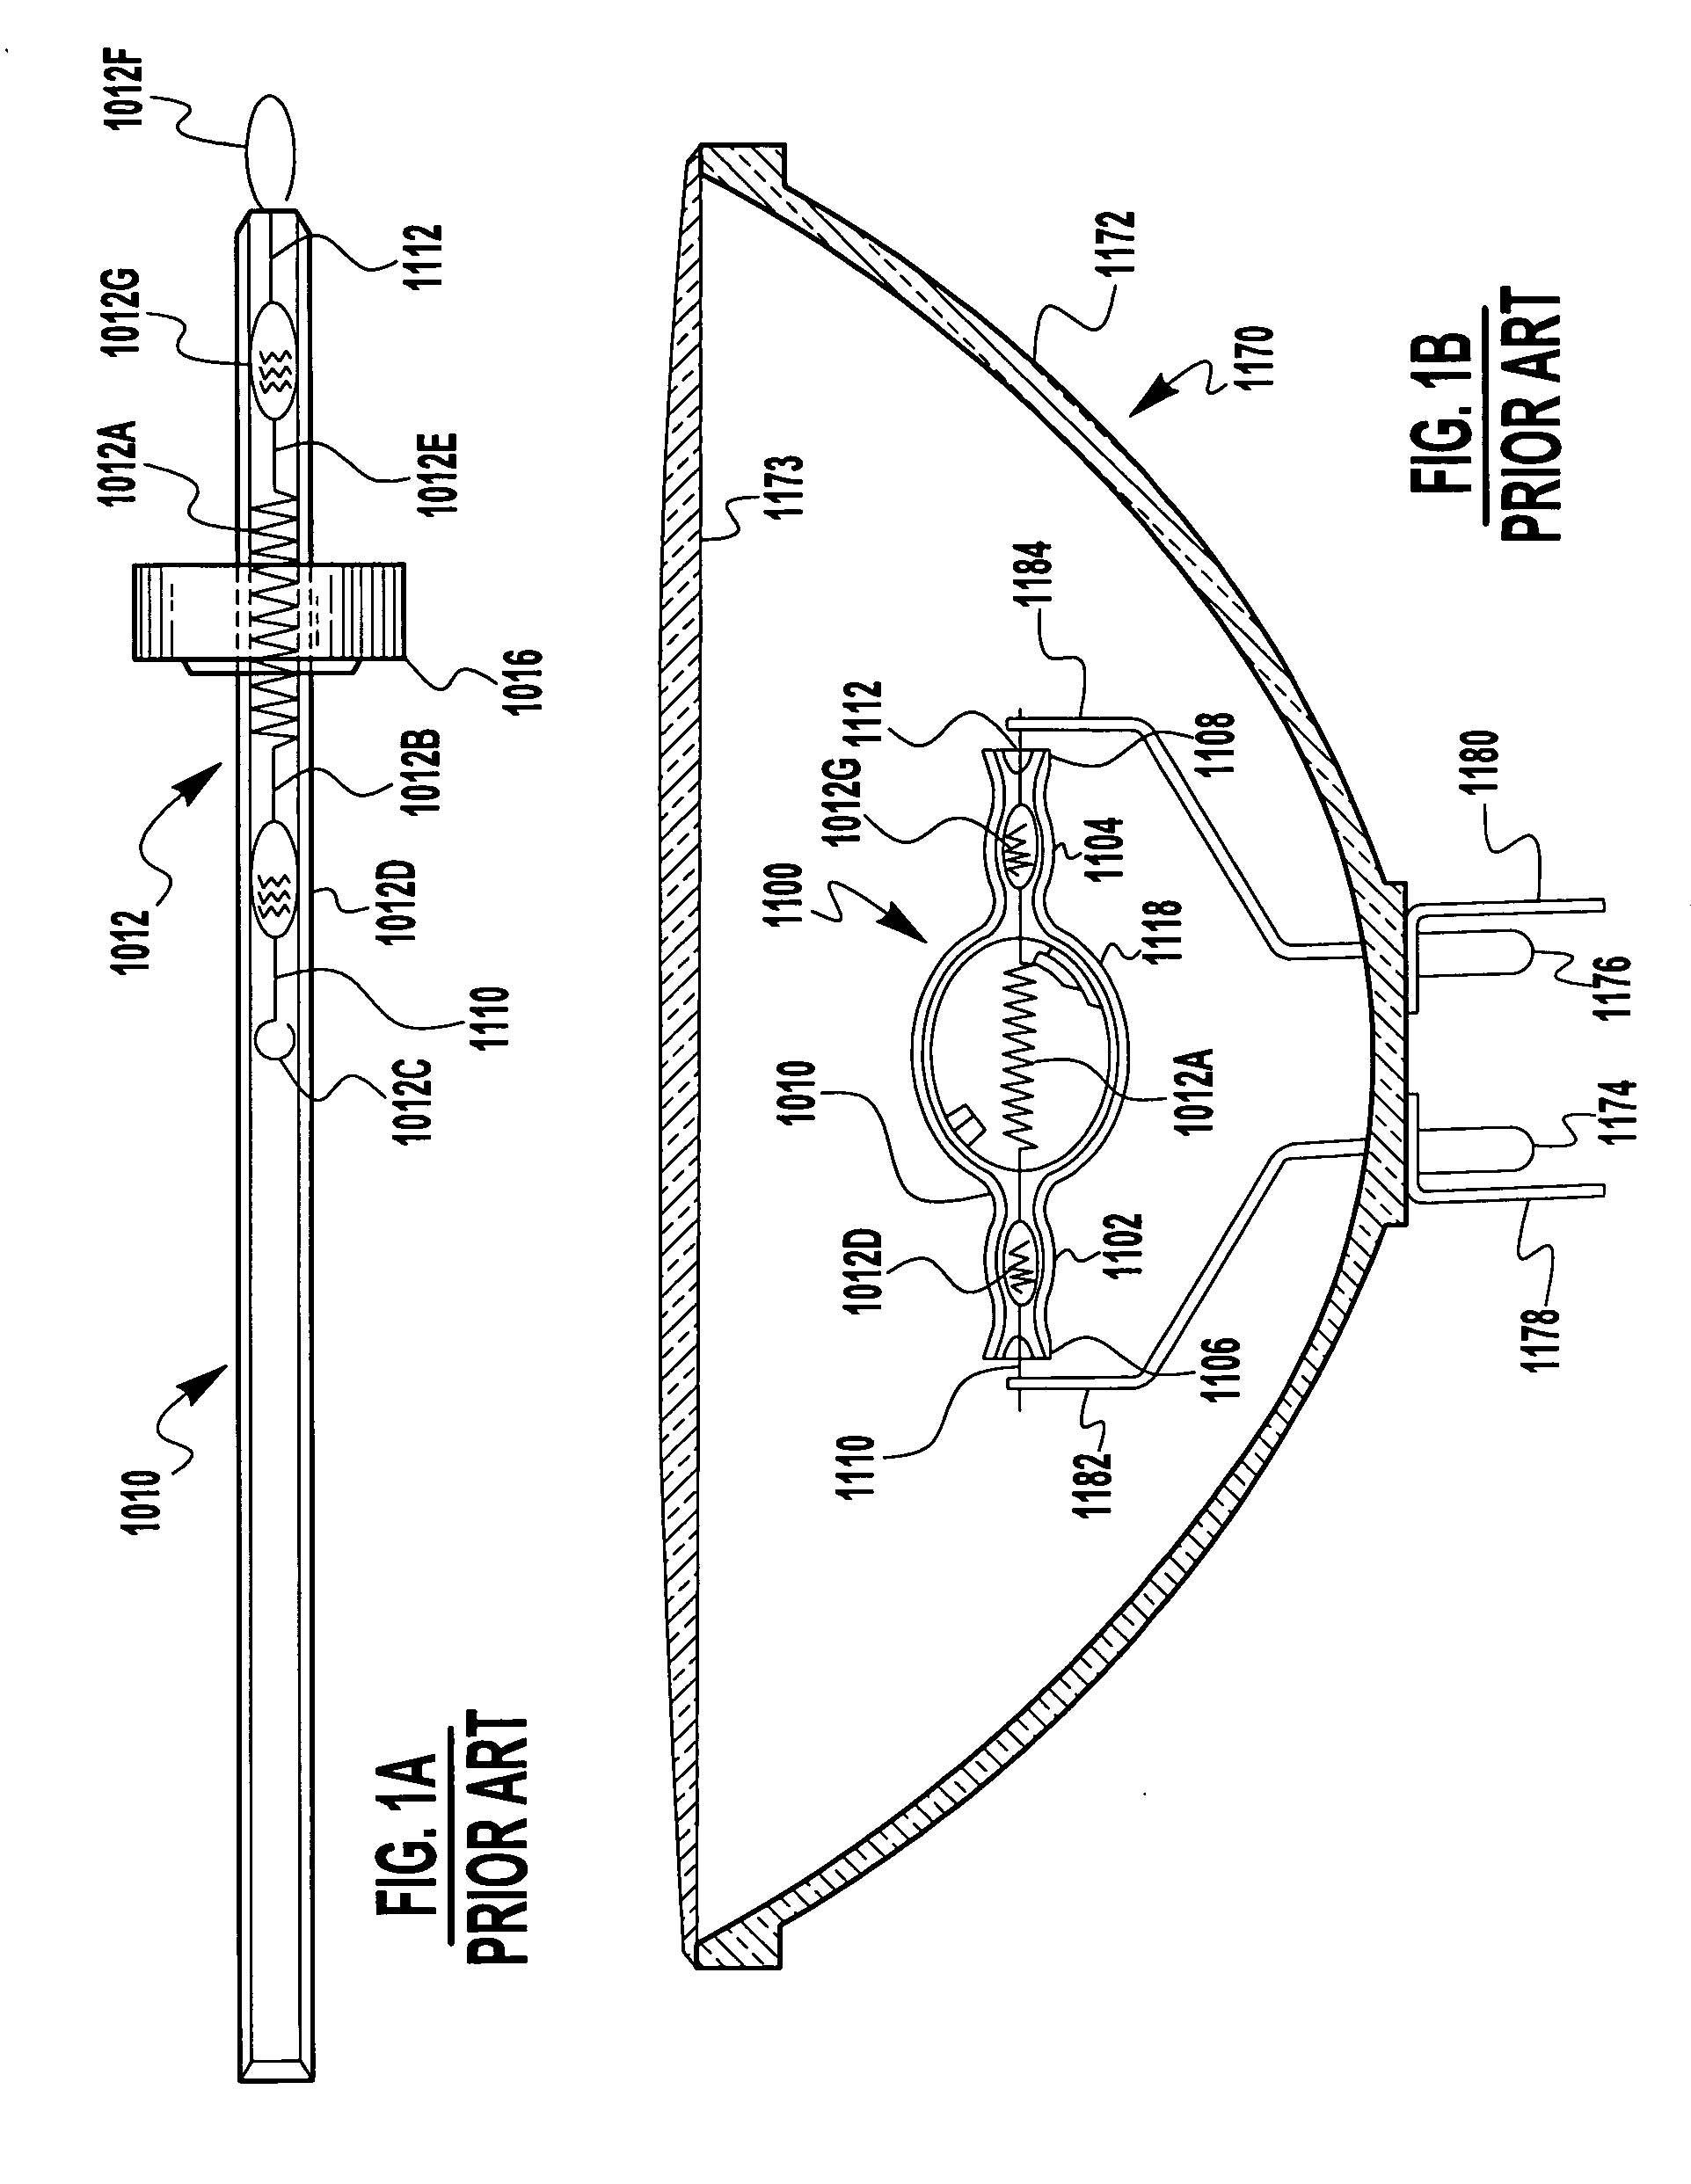 Spurred light source lead wire for handling and for assembling with a filament